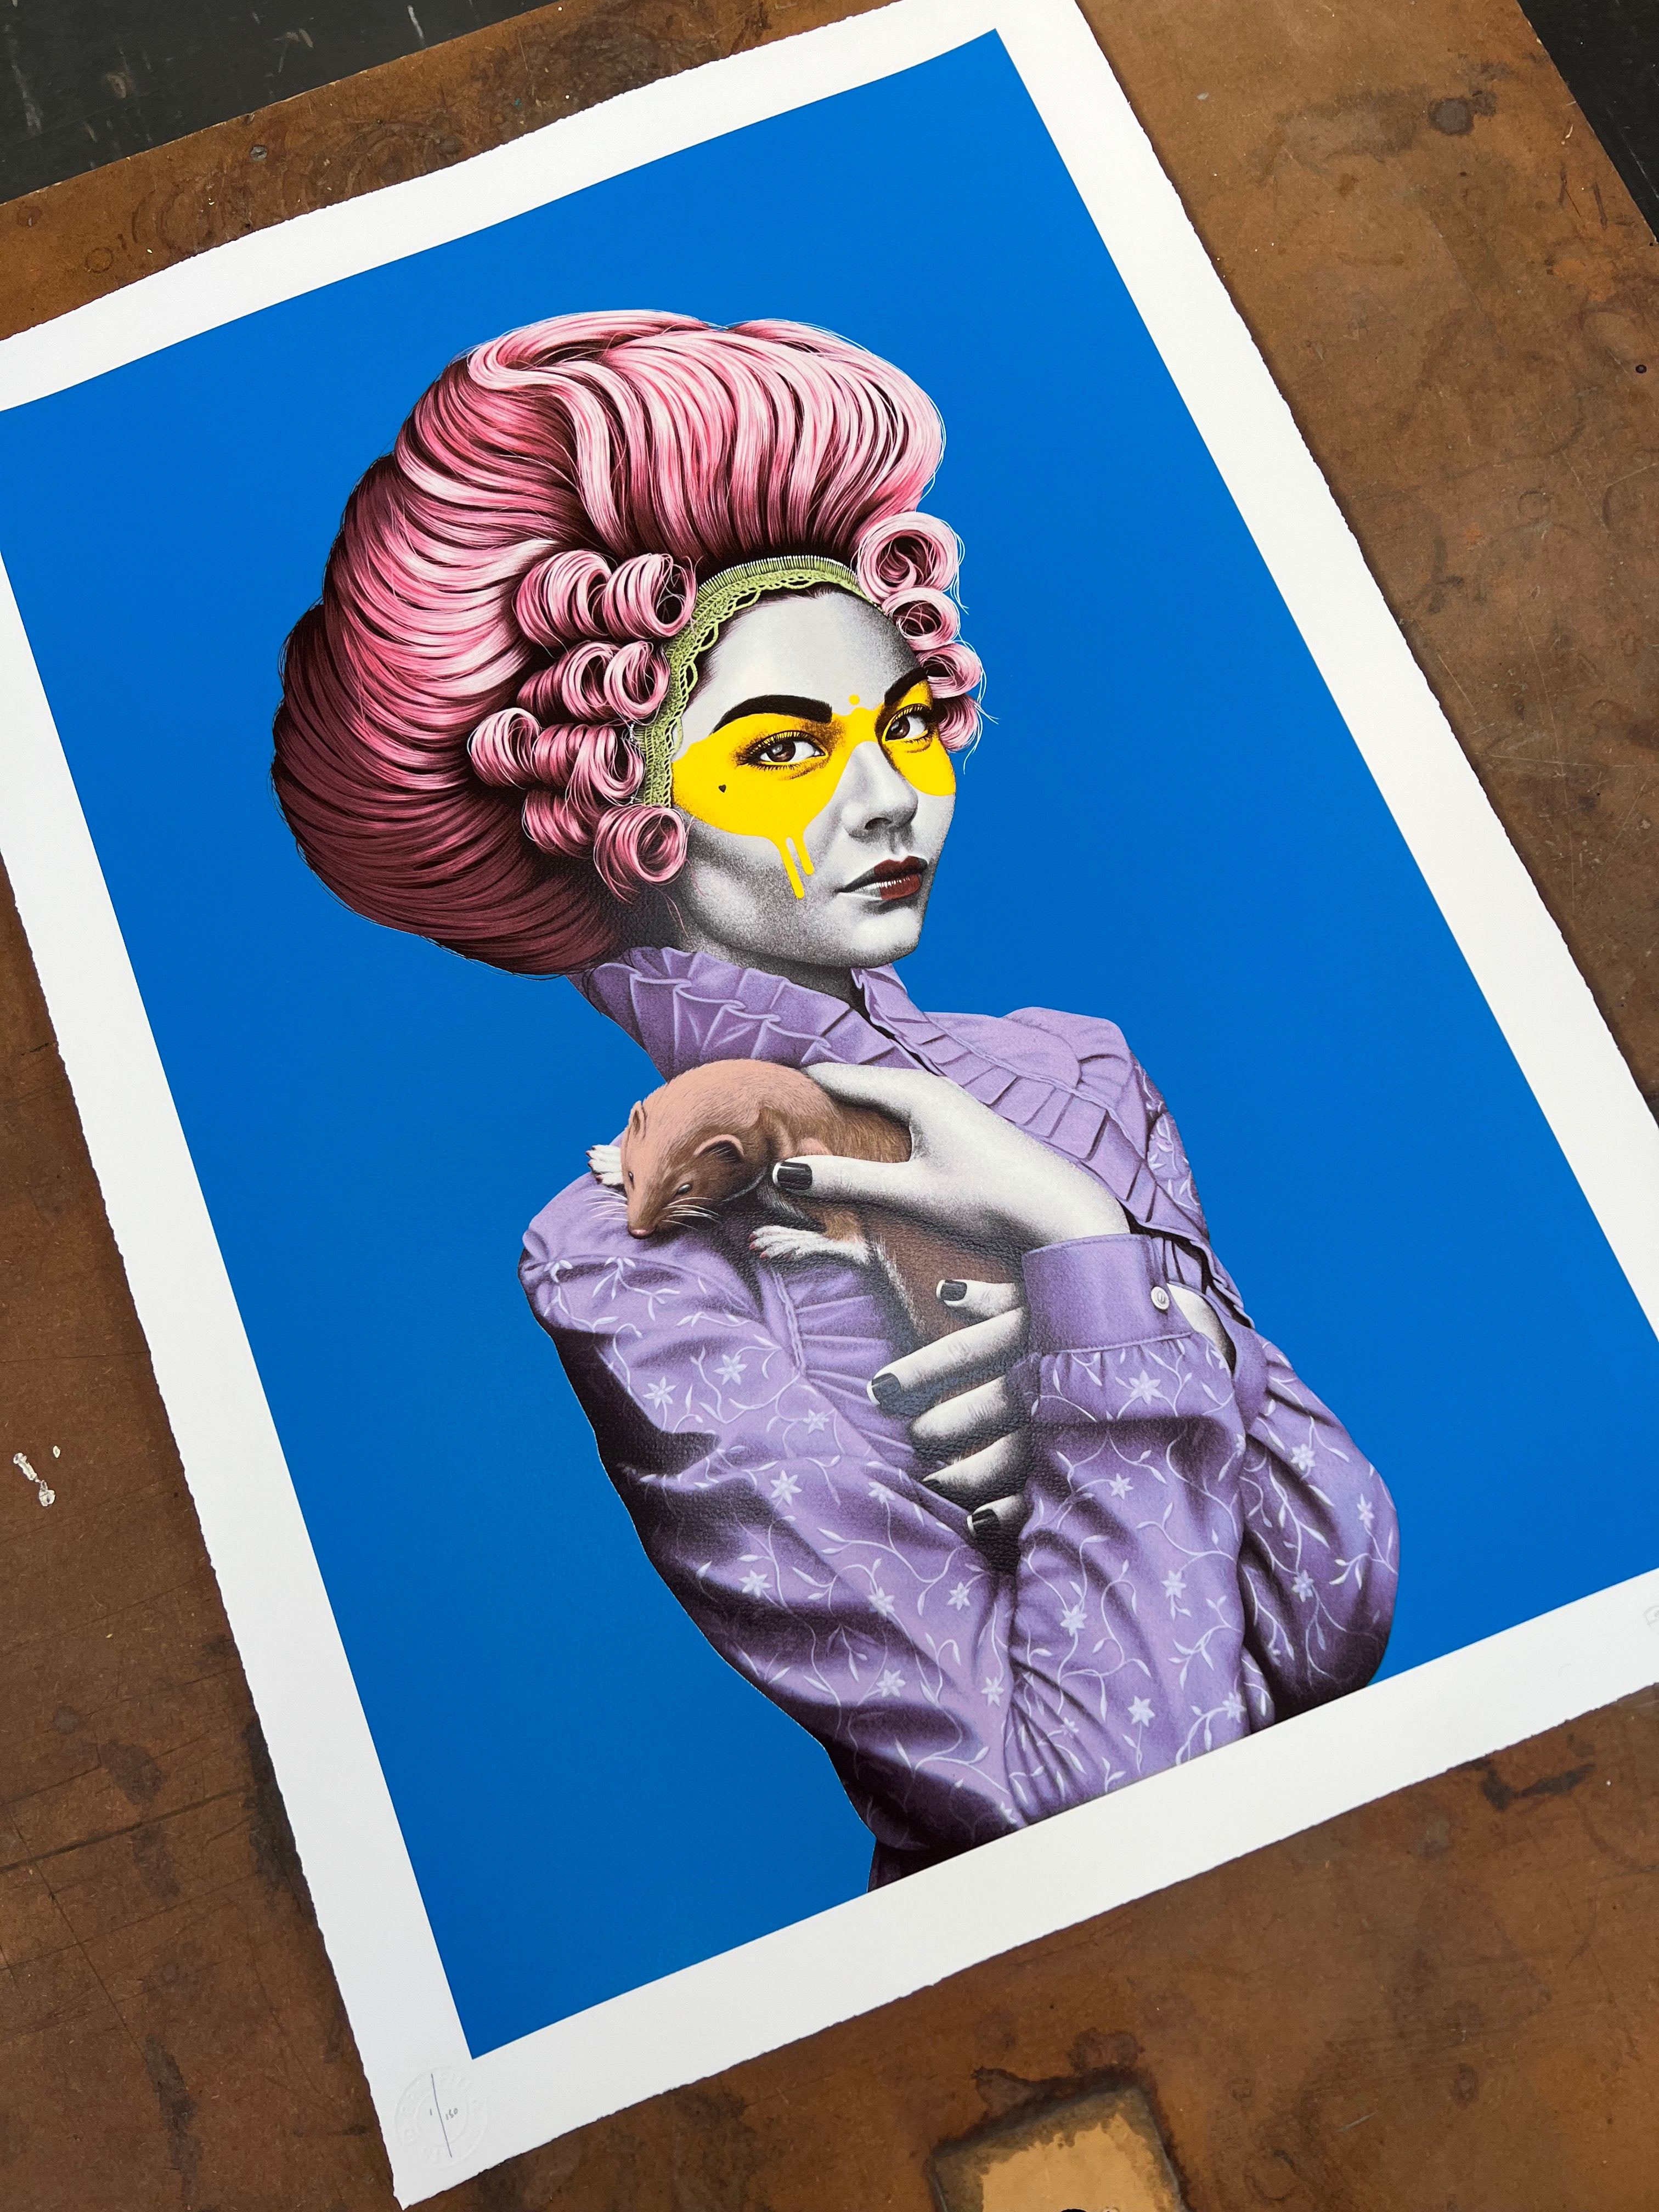 FINDAC TULLERIES ED OF 150